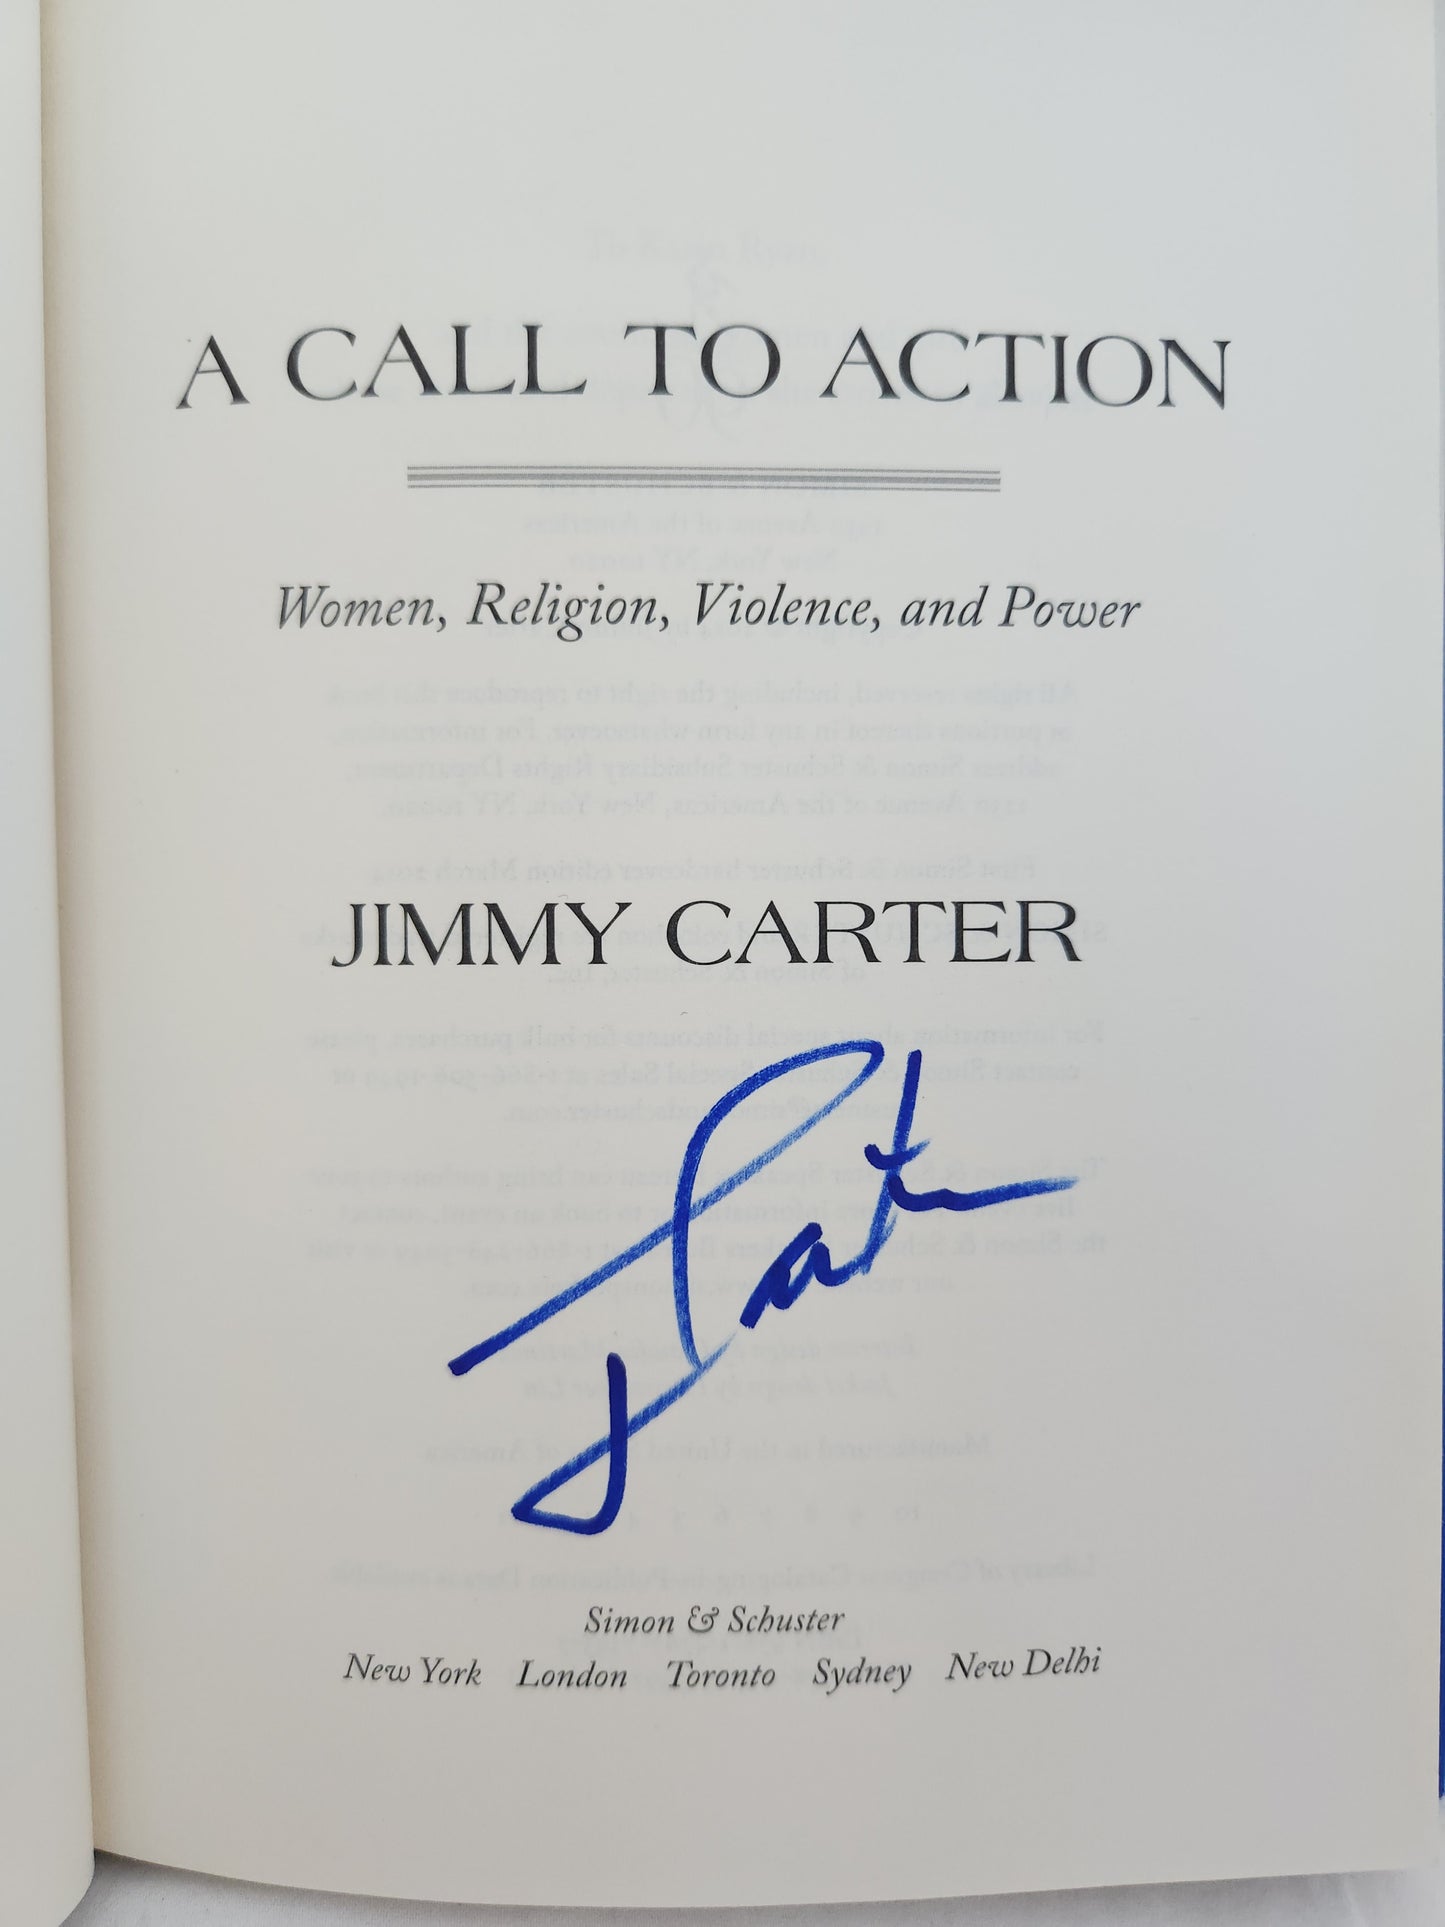 A Call to Action : Women, Religion, Violence, and Power by Jimmy Carter Signed Copy (2014, Hardcover)